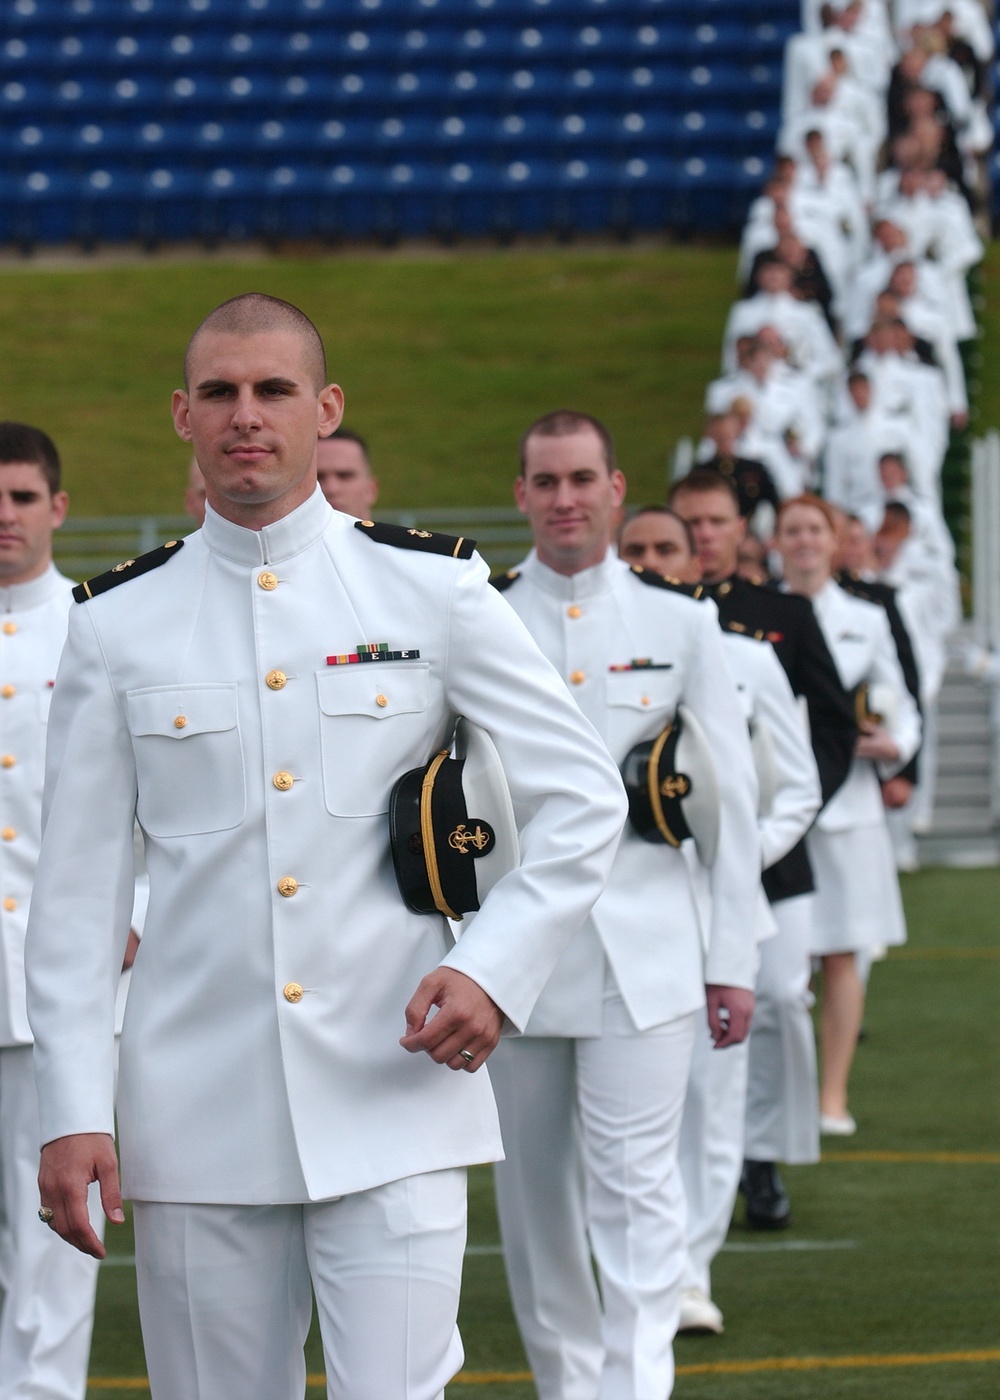 DVIDS Images Naval Academy Graduation [Image 4 of 4]